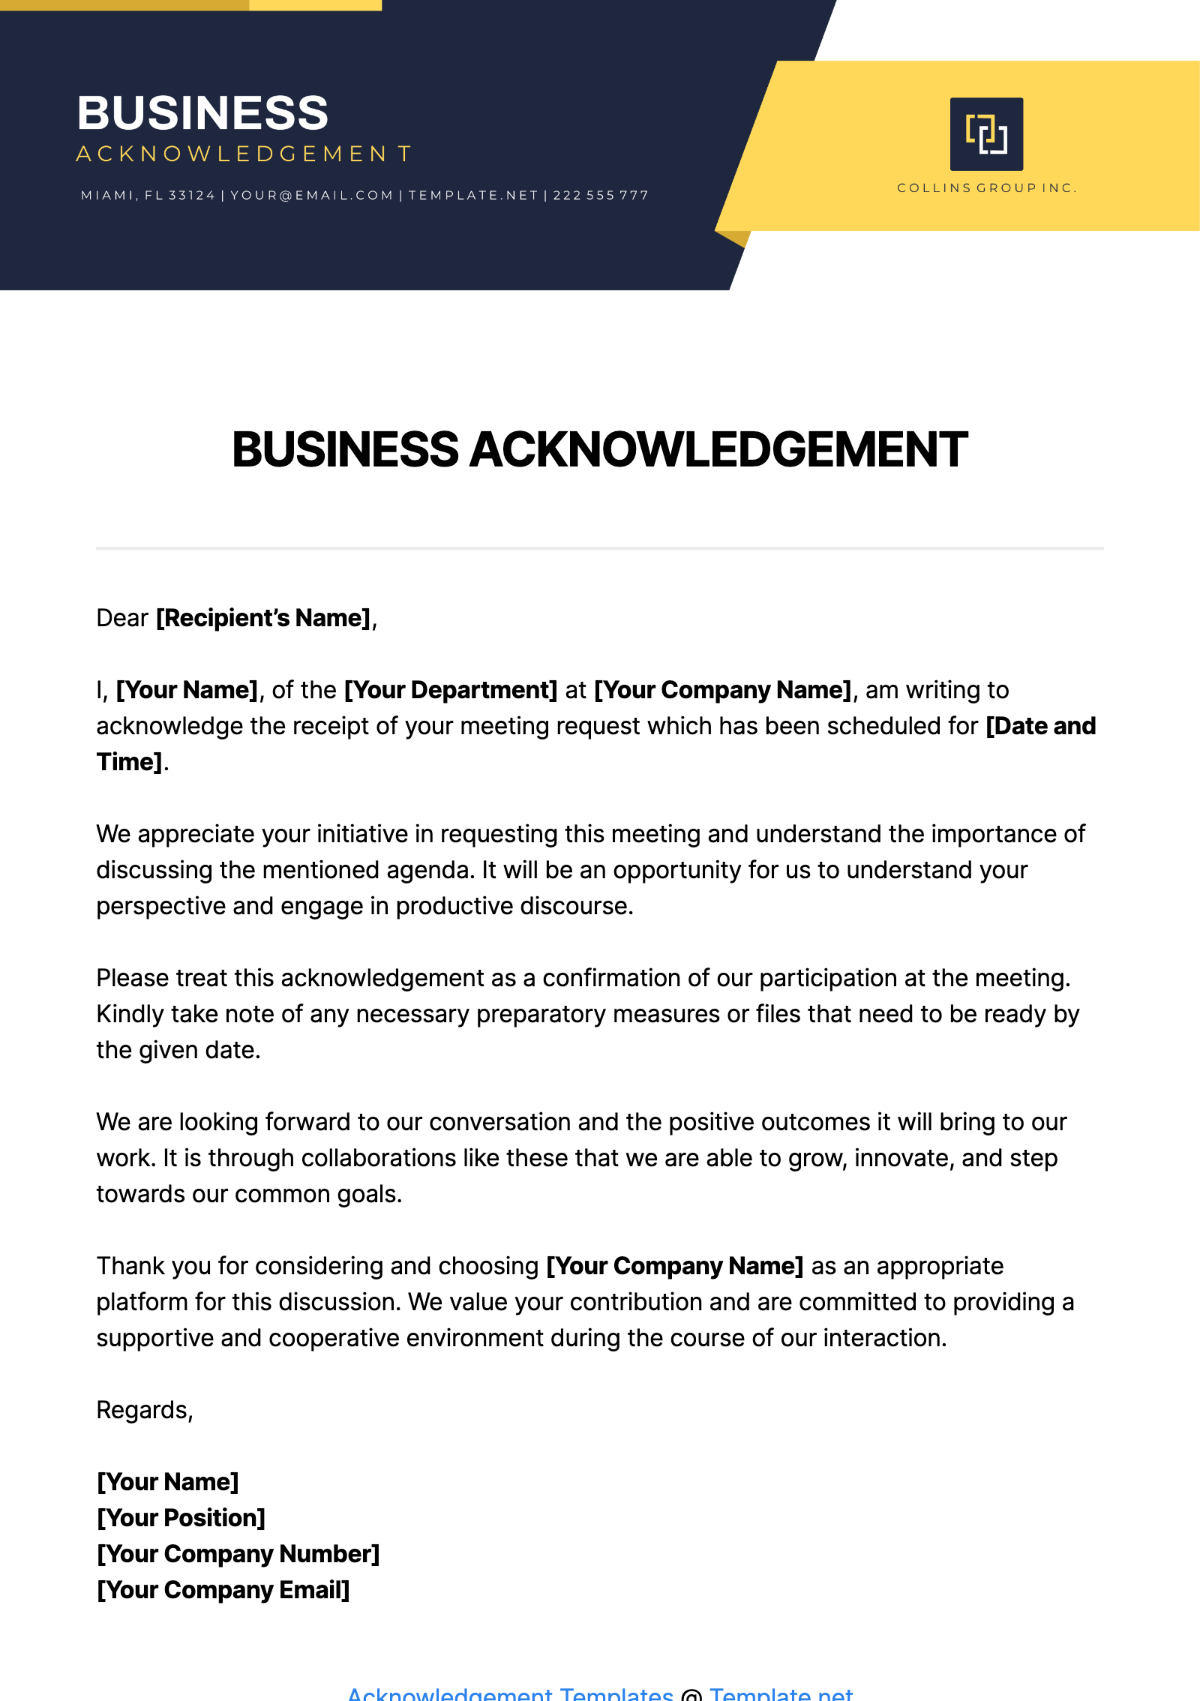 Business Acknowledgement Template